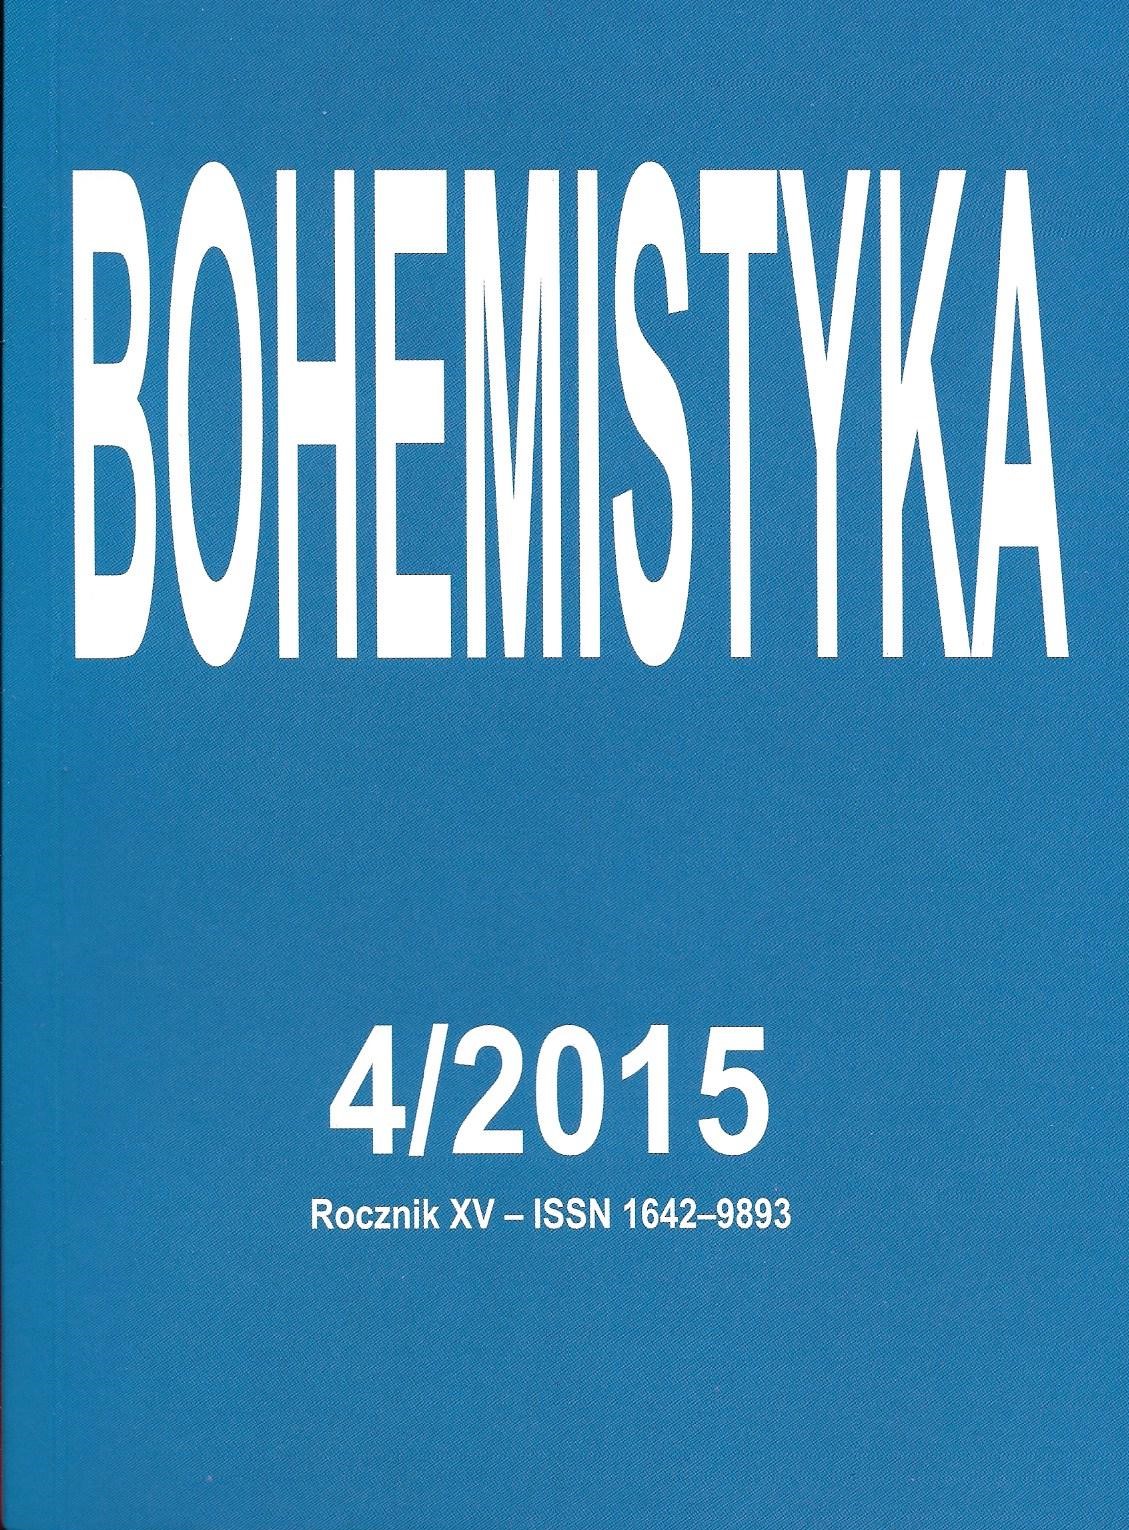 About theory of interference between languages on the lexical plane of Czech and Polish Cover Image